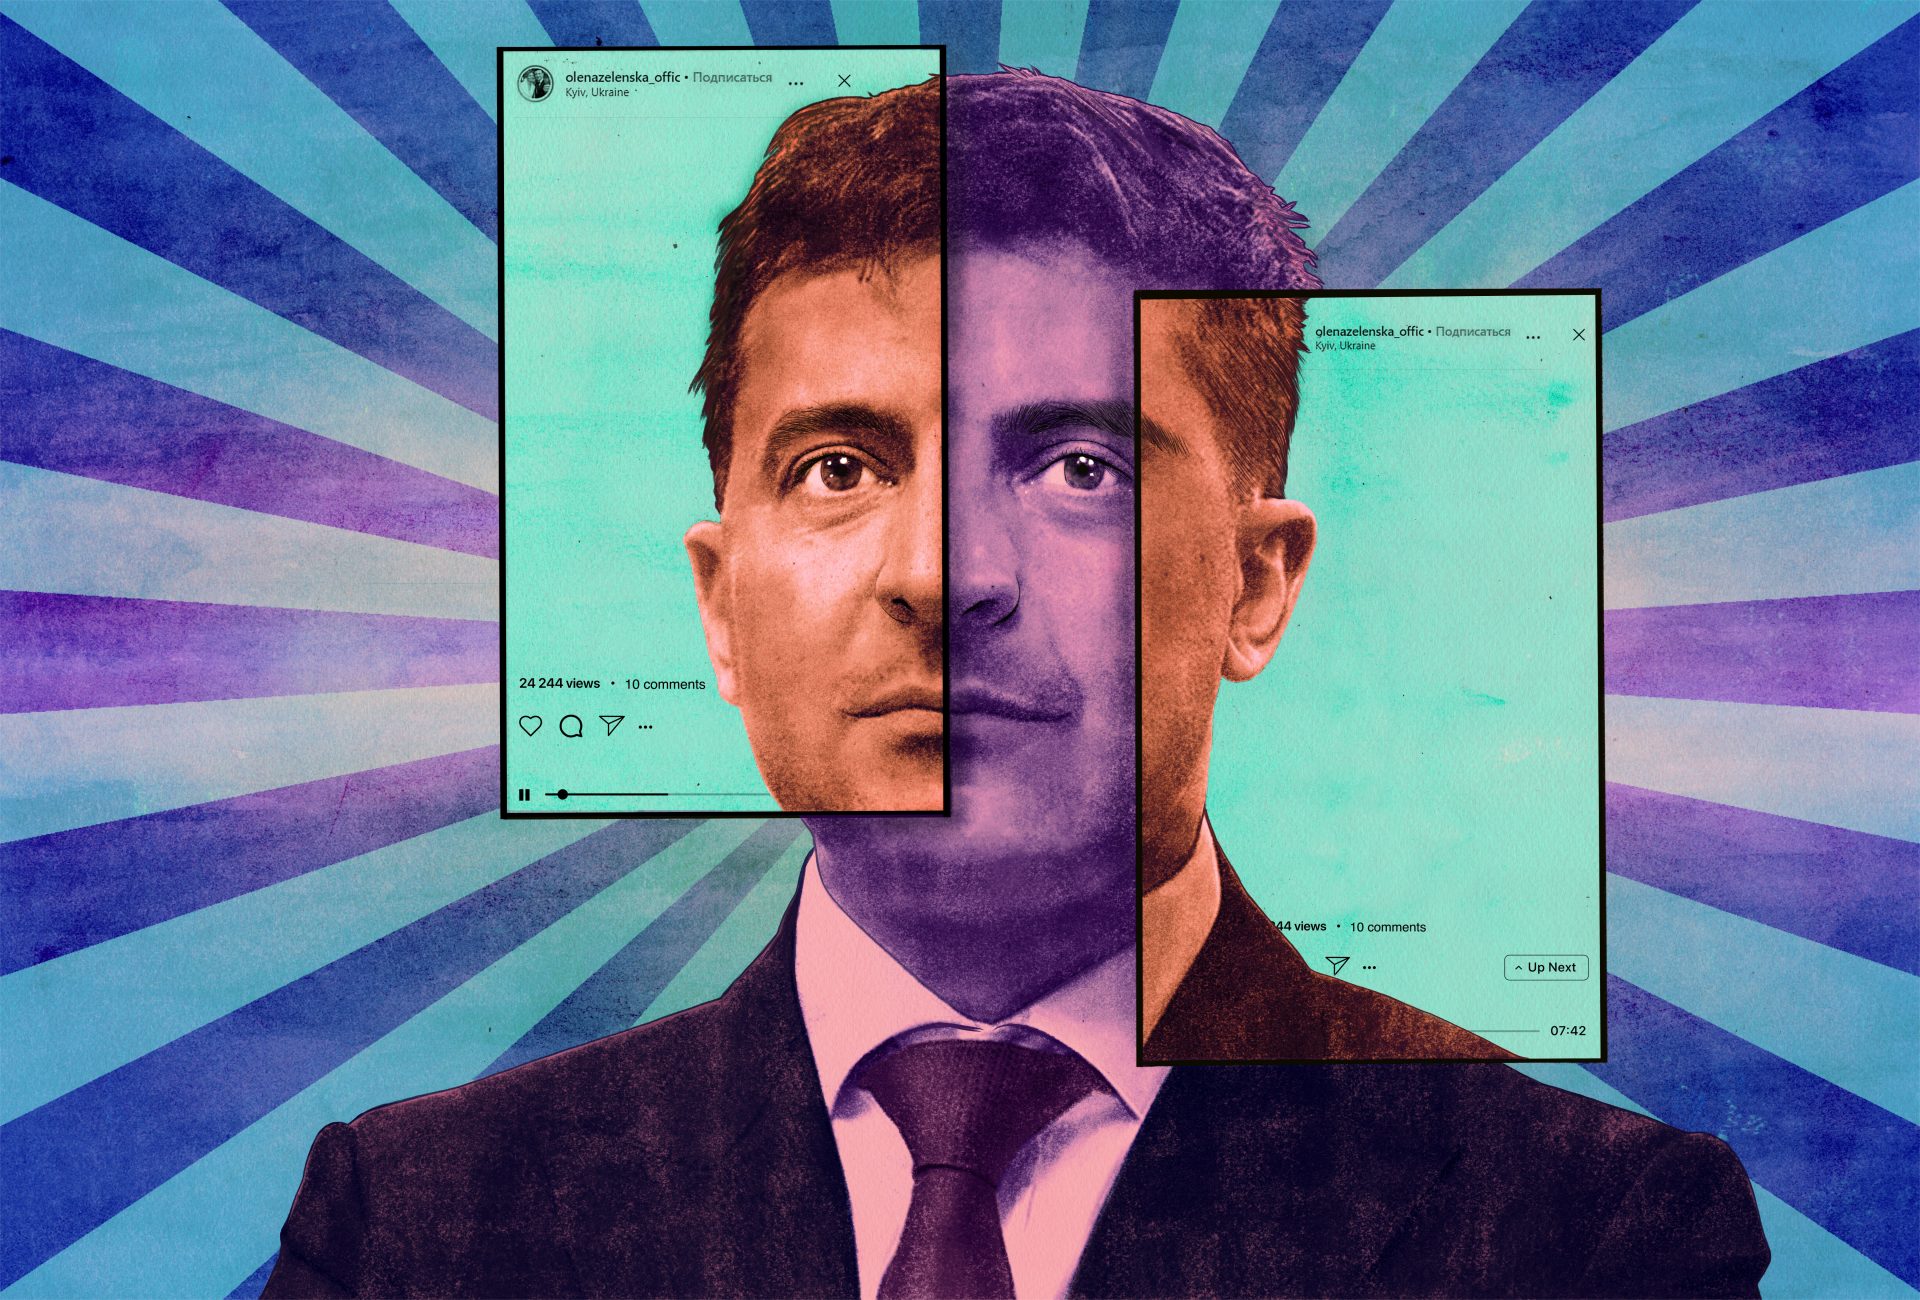 Stylized illustration of Ukraine President Volodymyr Zelensky with social media superimposed over his face.